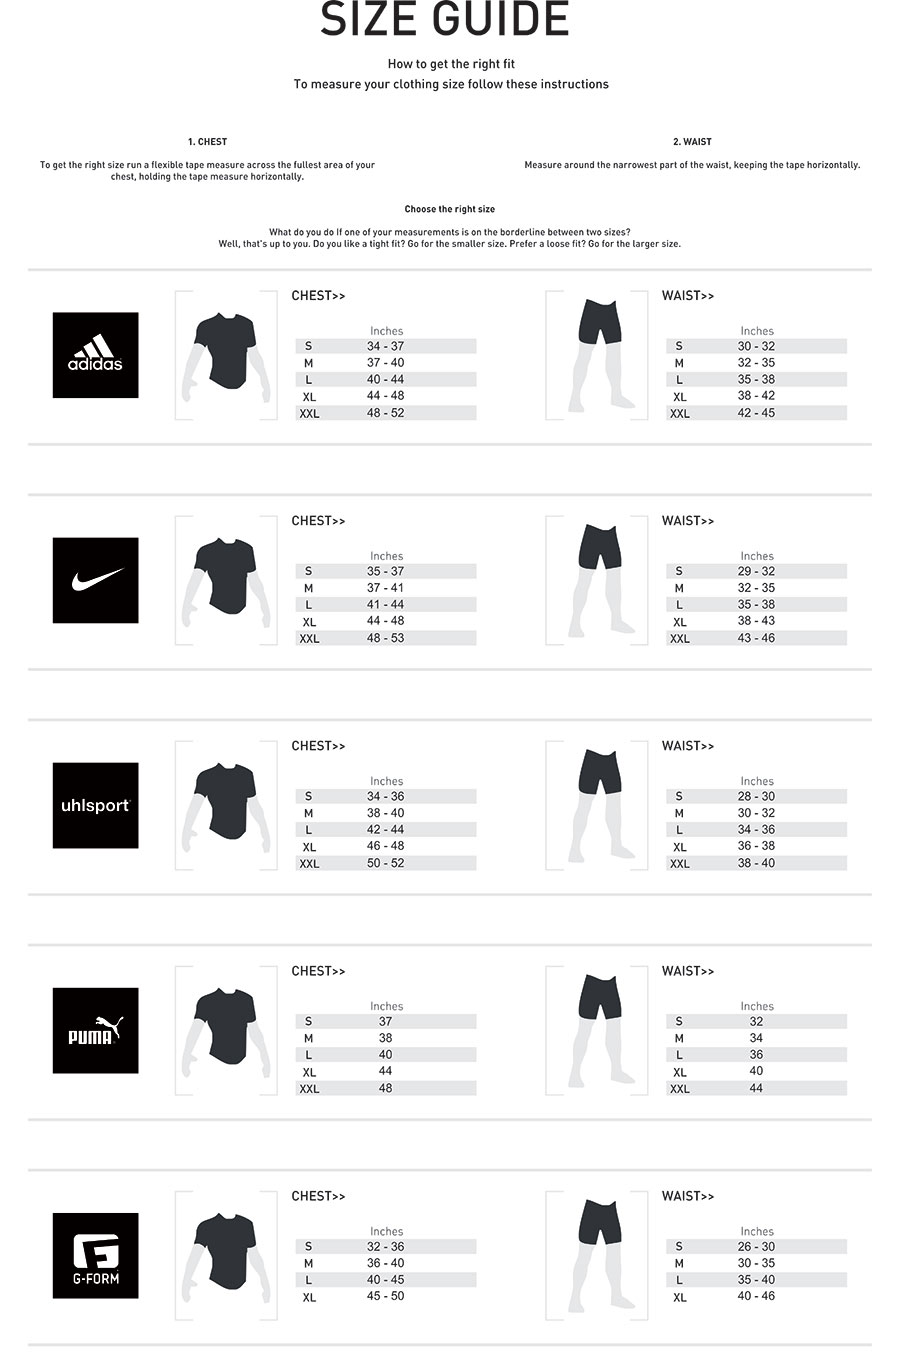 adidas size guide mens clothing